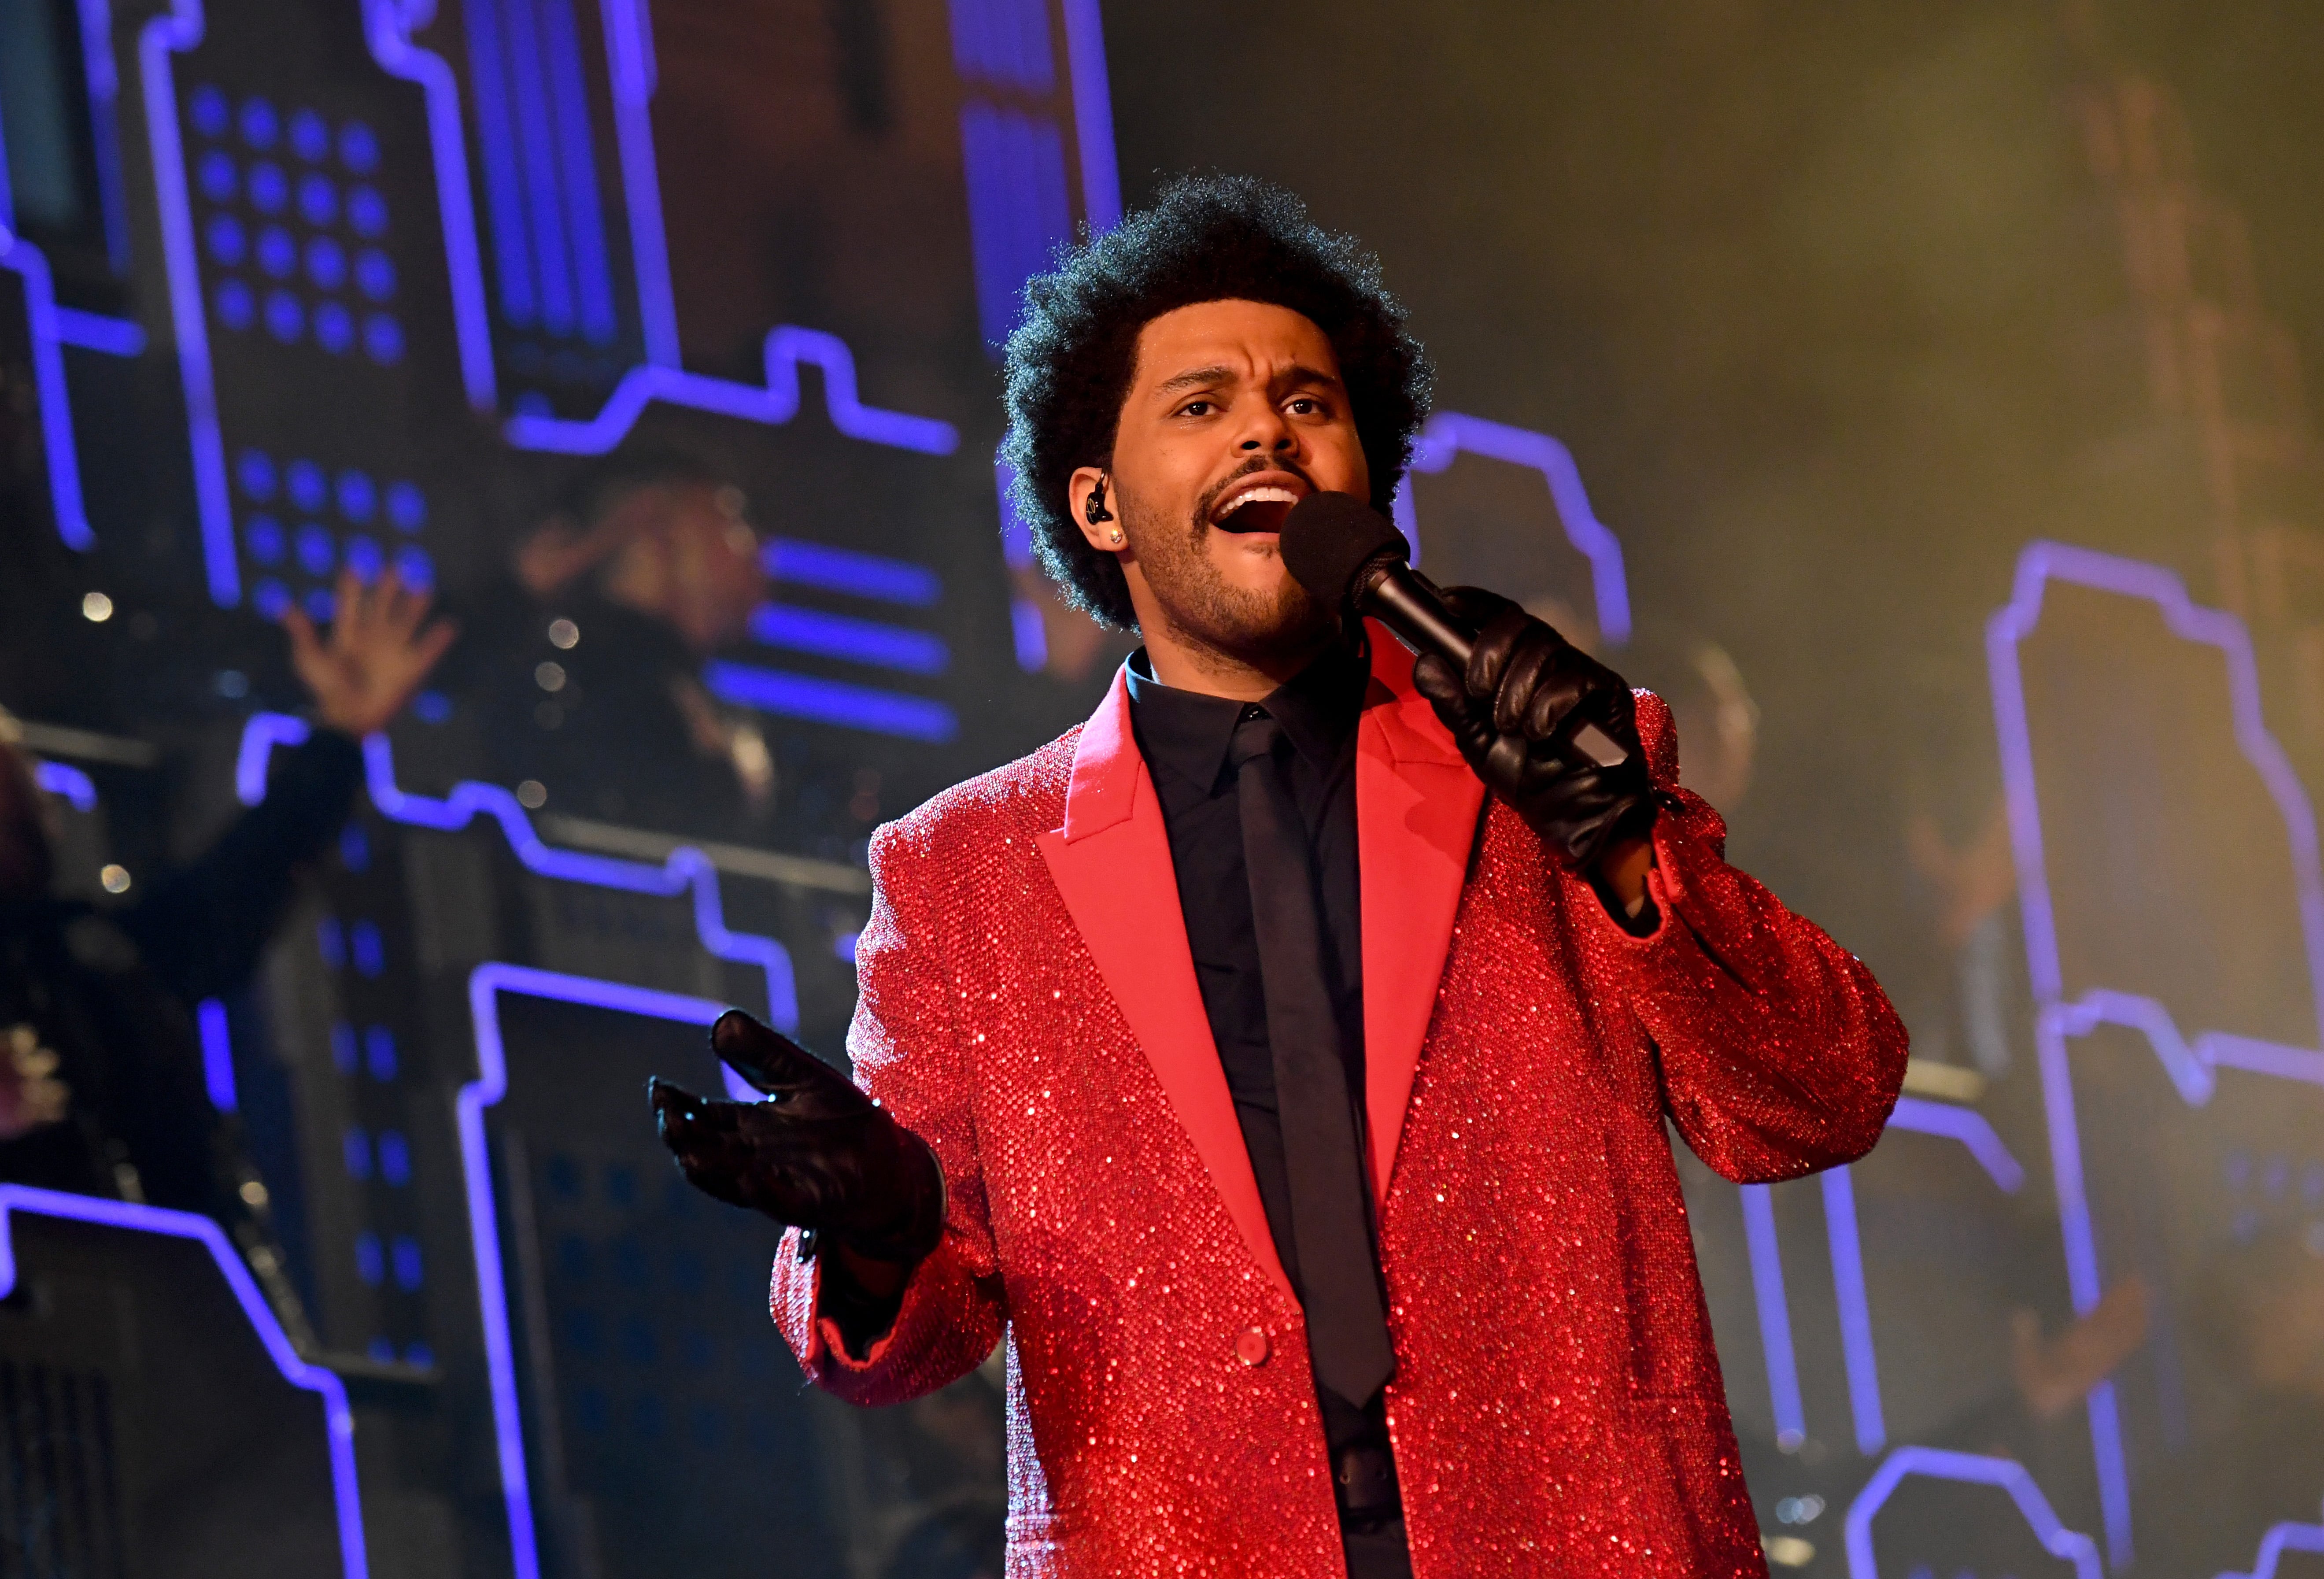 Timeline of the Weeknd's 'After Hours' Red Suit: PHOTOS